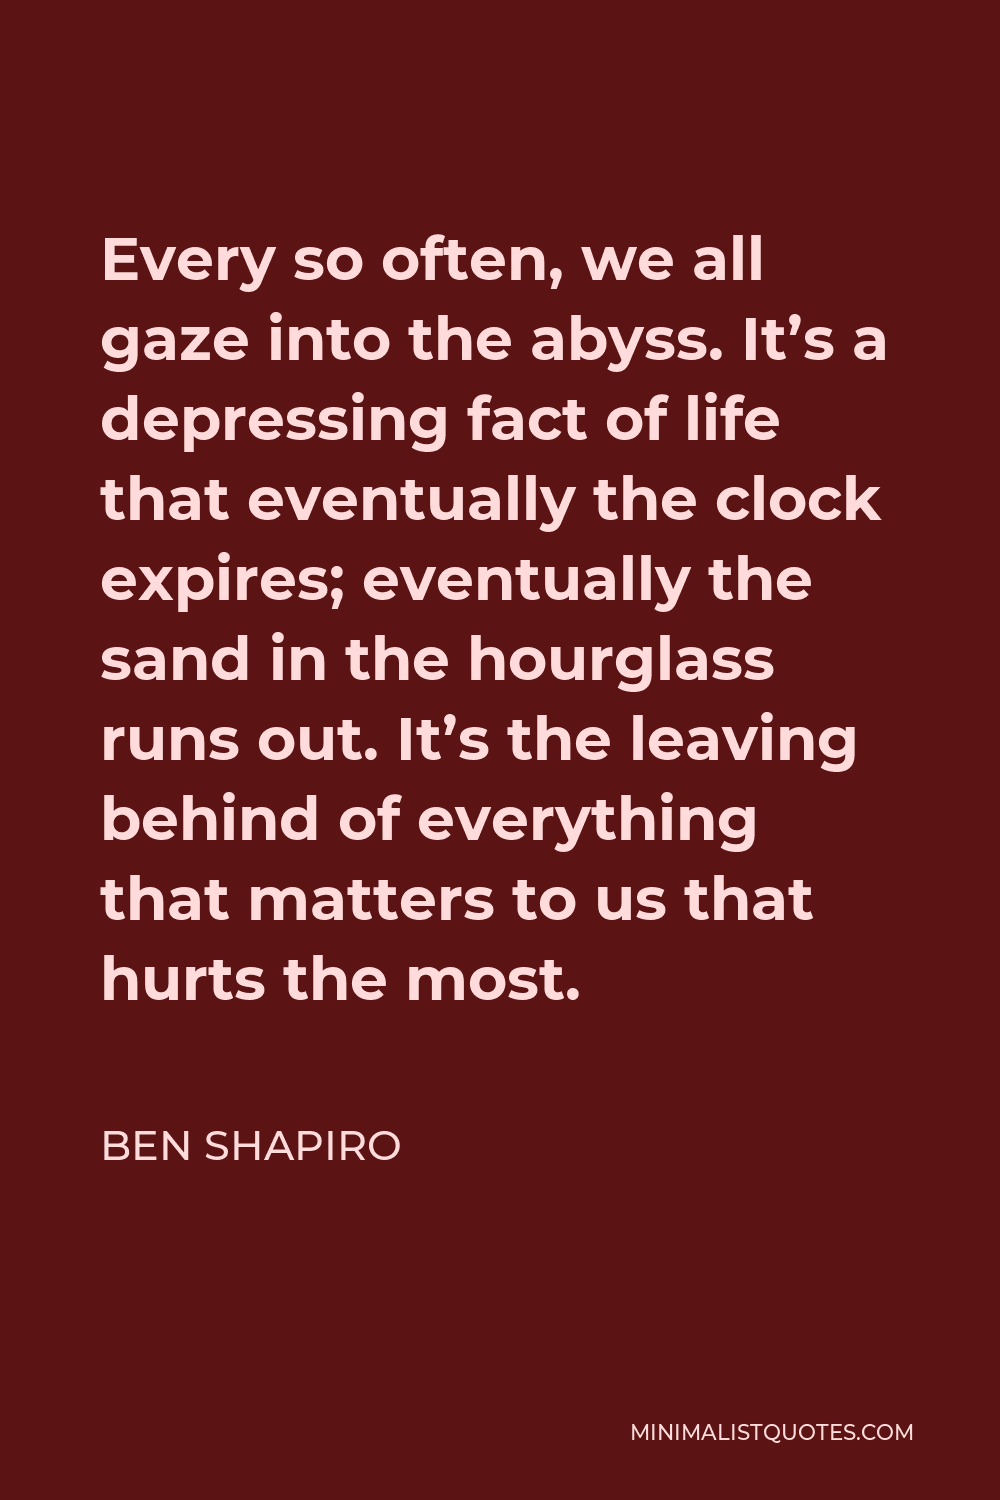 Ben Shapiro Quote - Every so often, we all gaze into the abyss. It’s a depressing fact of life that eventually the clock expires; eventually the sand in the hourglass runs out. It’s the leaving behind of everything that matters to us that hurts the most.